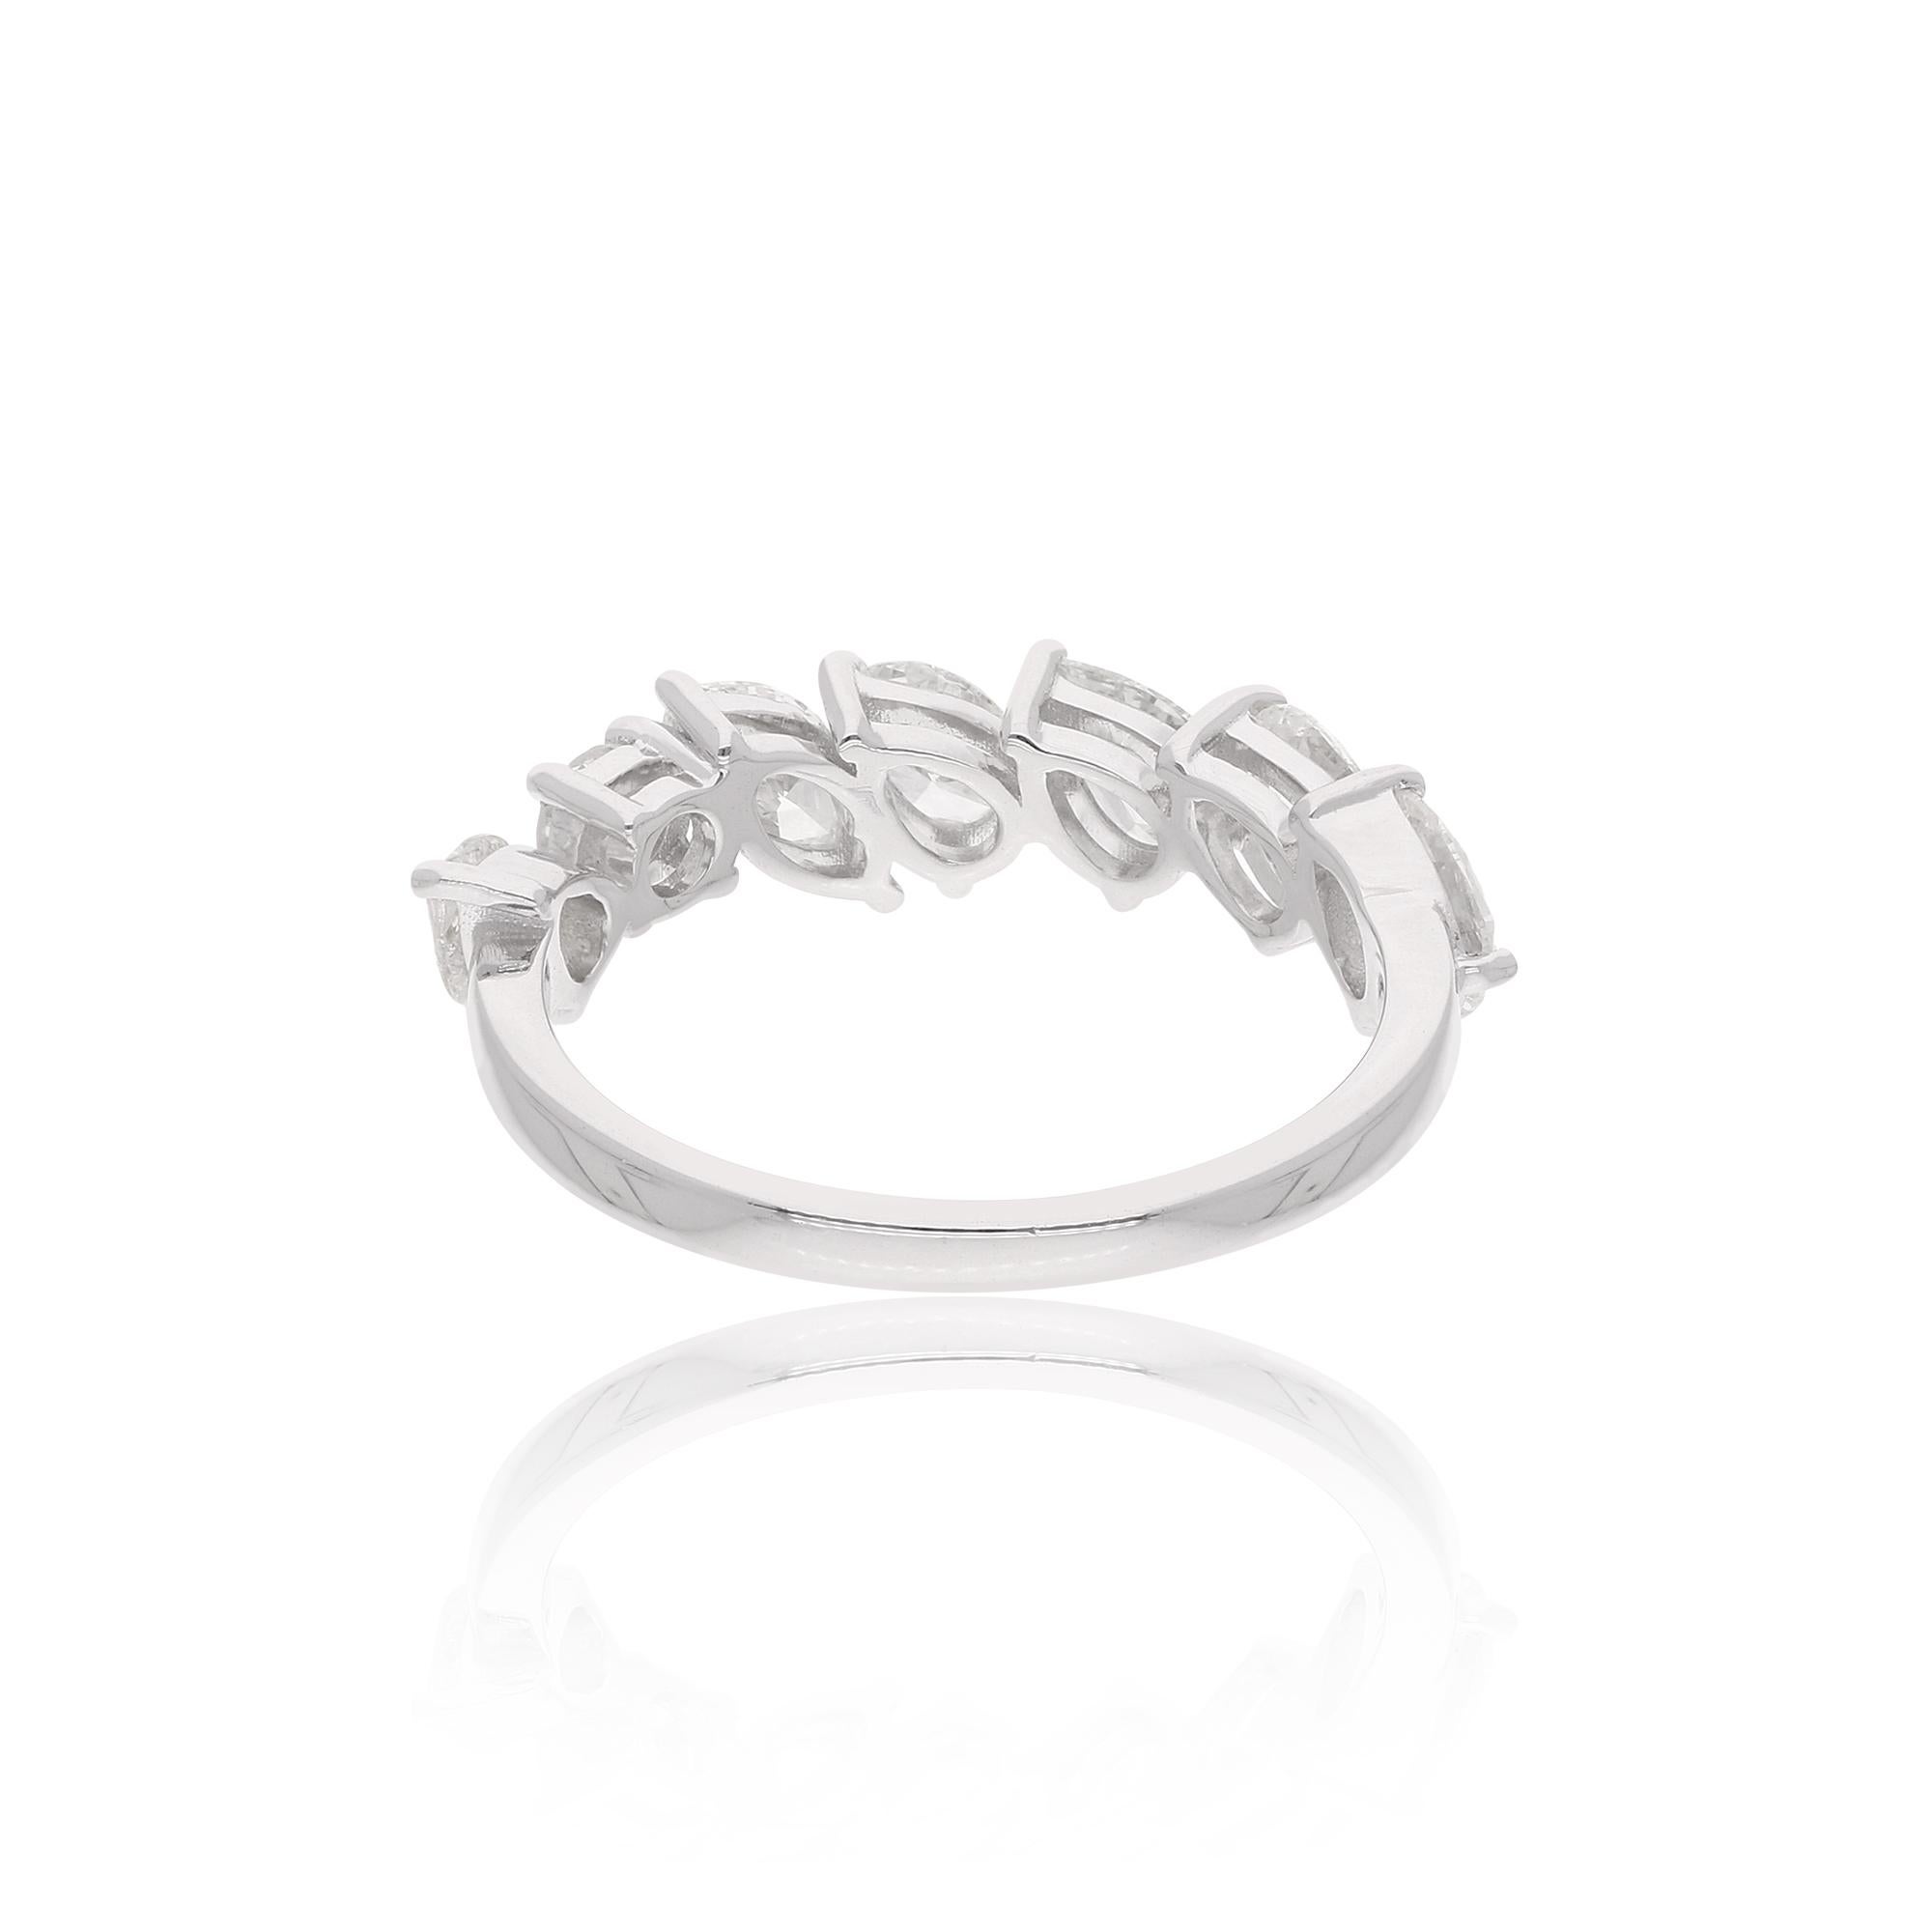 This Ring is perfect for mixing and matching with other stackable rings to create a customized look that's unique to you. Wear it alone for a minimalist look or stack it with other rings for a more dramatic effect. This ring is available in